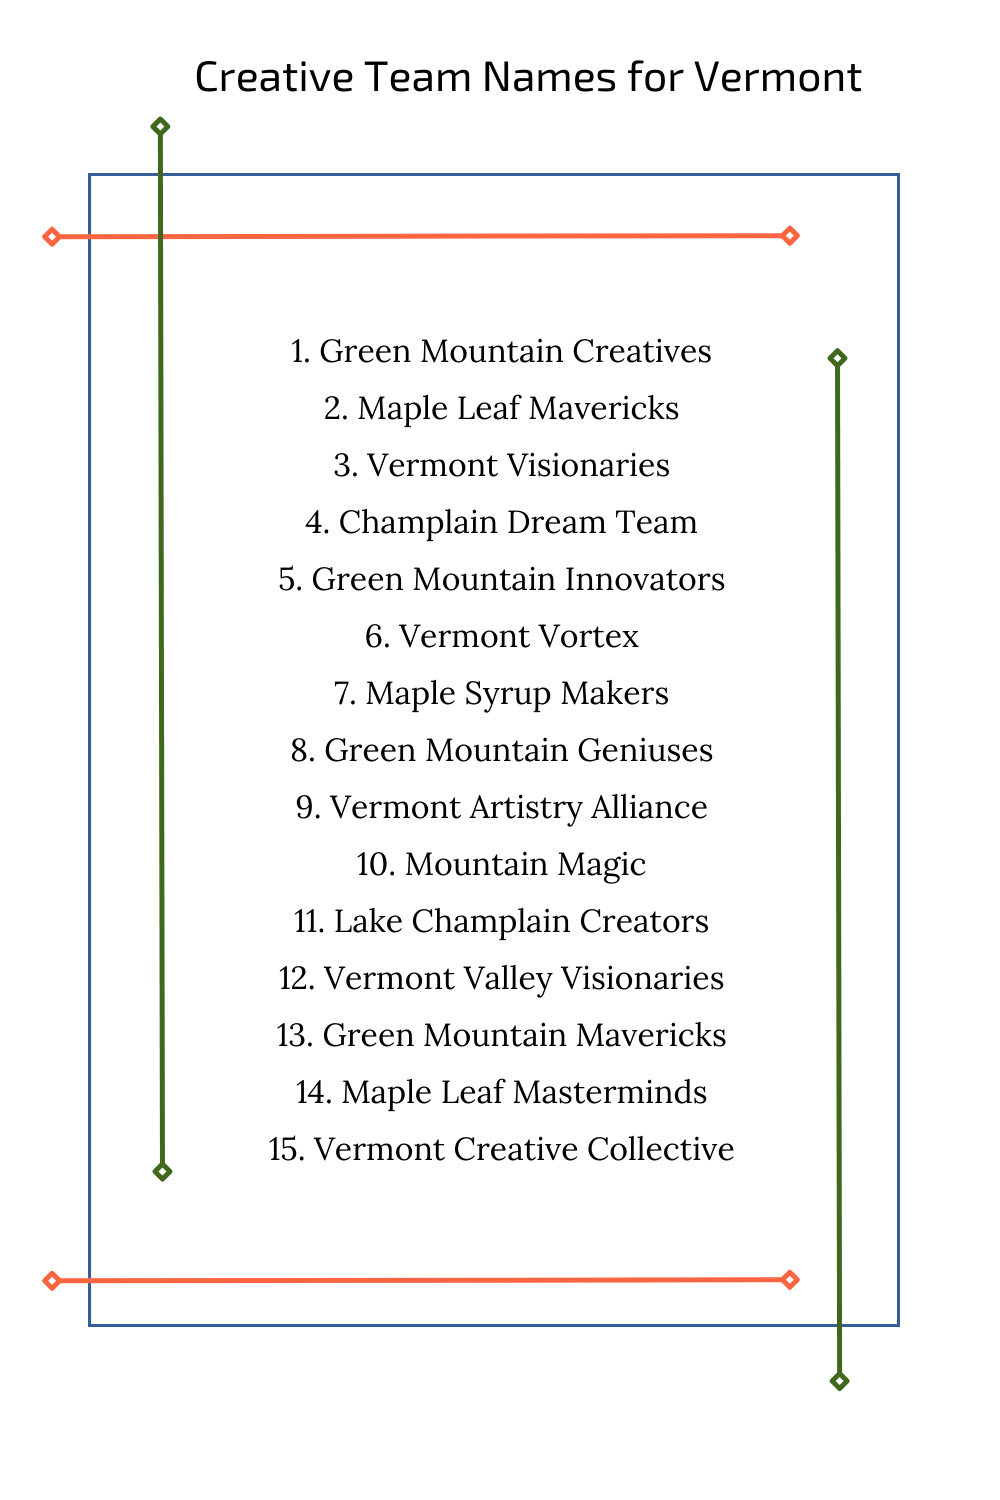 Creative Team Names for Vermont